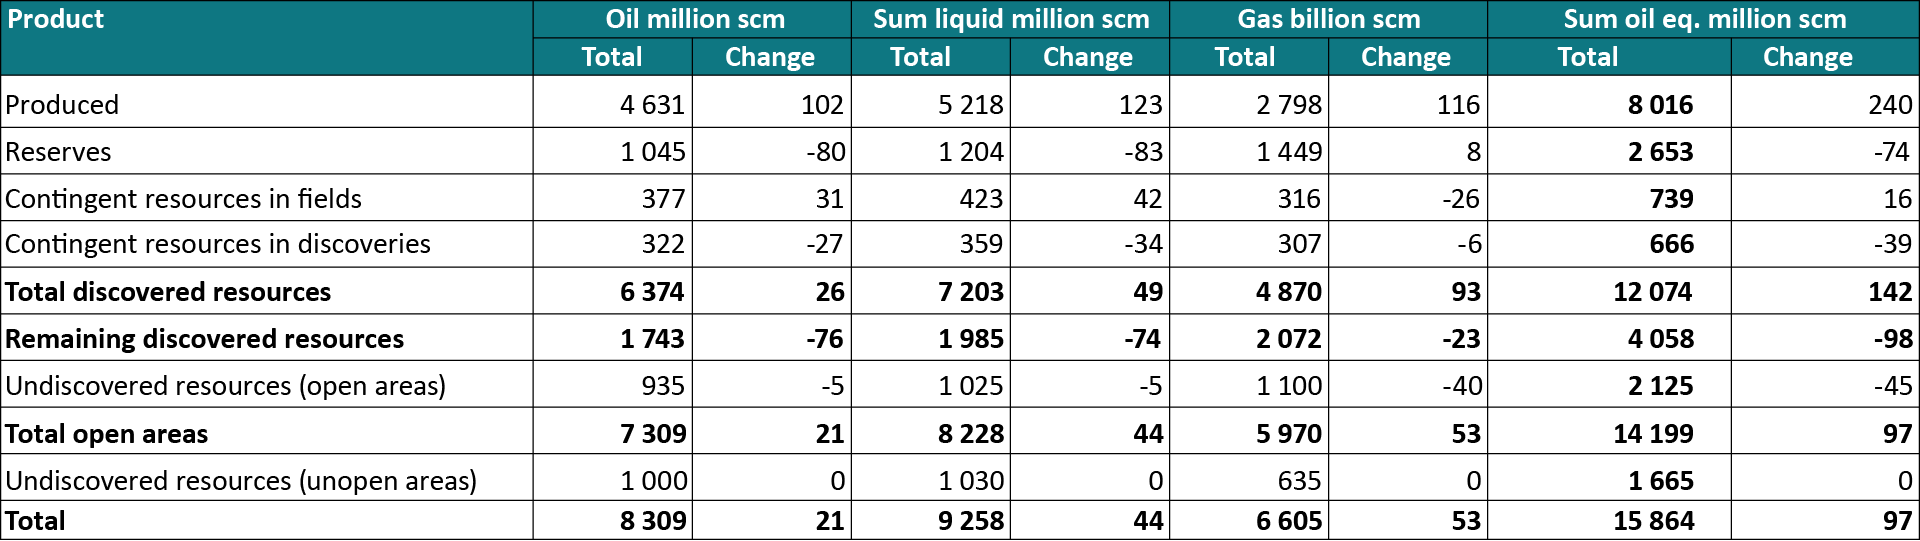 The volumes are listed in oil equivalent (1,000 scm gas = 1 scm oe)